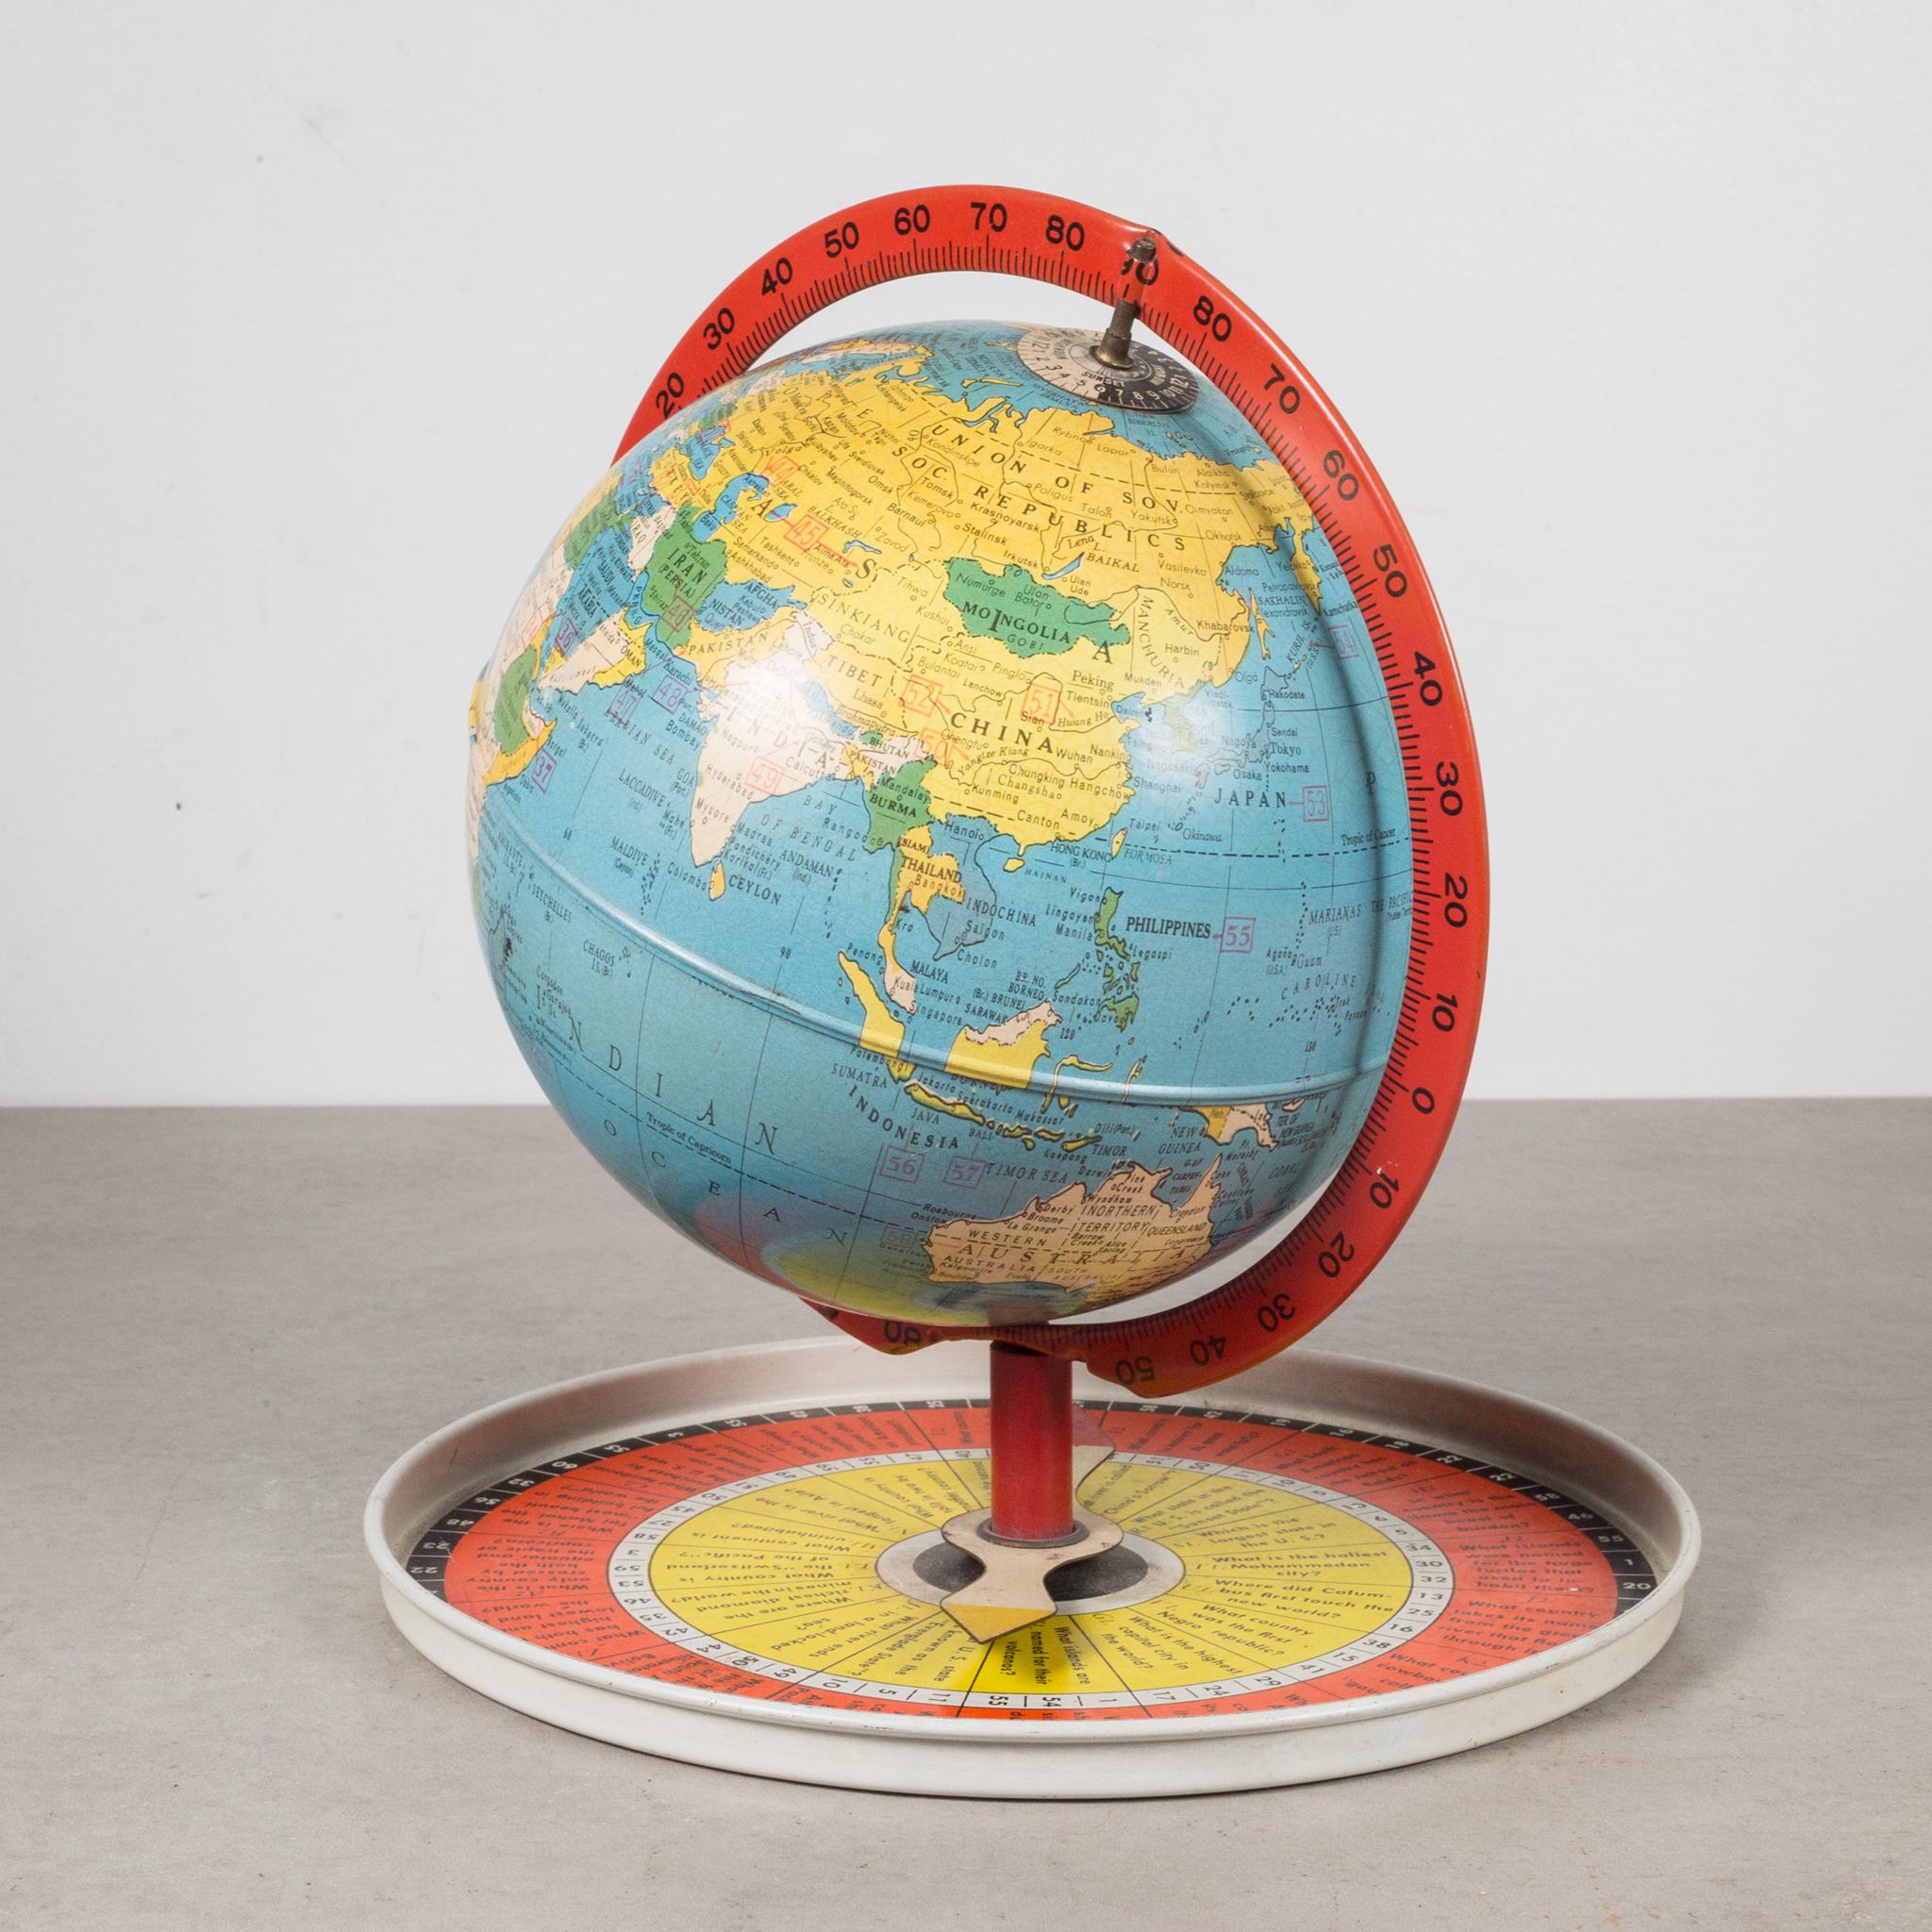 About

An antique all metal travel game globe with spinning dial and multiple geography questions on the bottom.

Creator: Replogle.
Date of manufacture: c.1950.
Materials and techniques: Tin.
Condition: Good. Wear consistent with age and